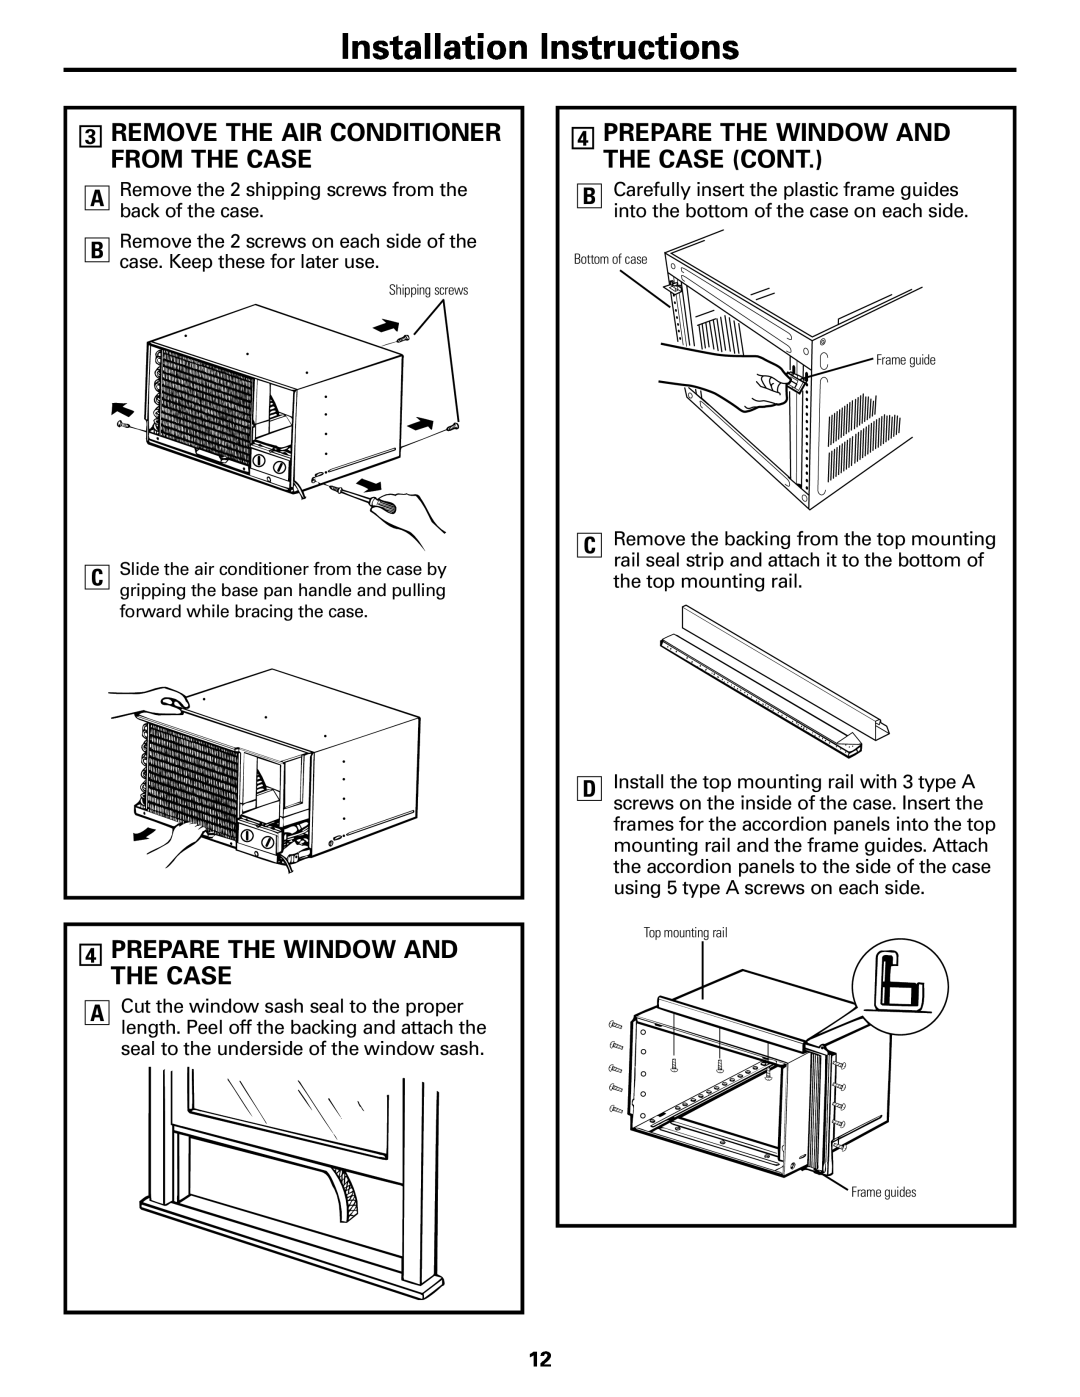 GE AGF18 3REMOVE THE AIR CONDITIONER FROM THE CASE, 4PREPARE THE WINDOW AND THE CASE, Installation Instructions 